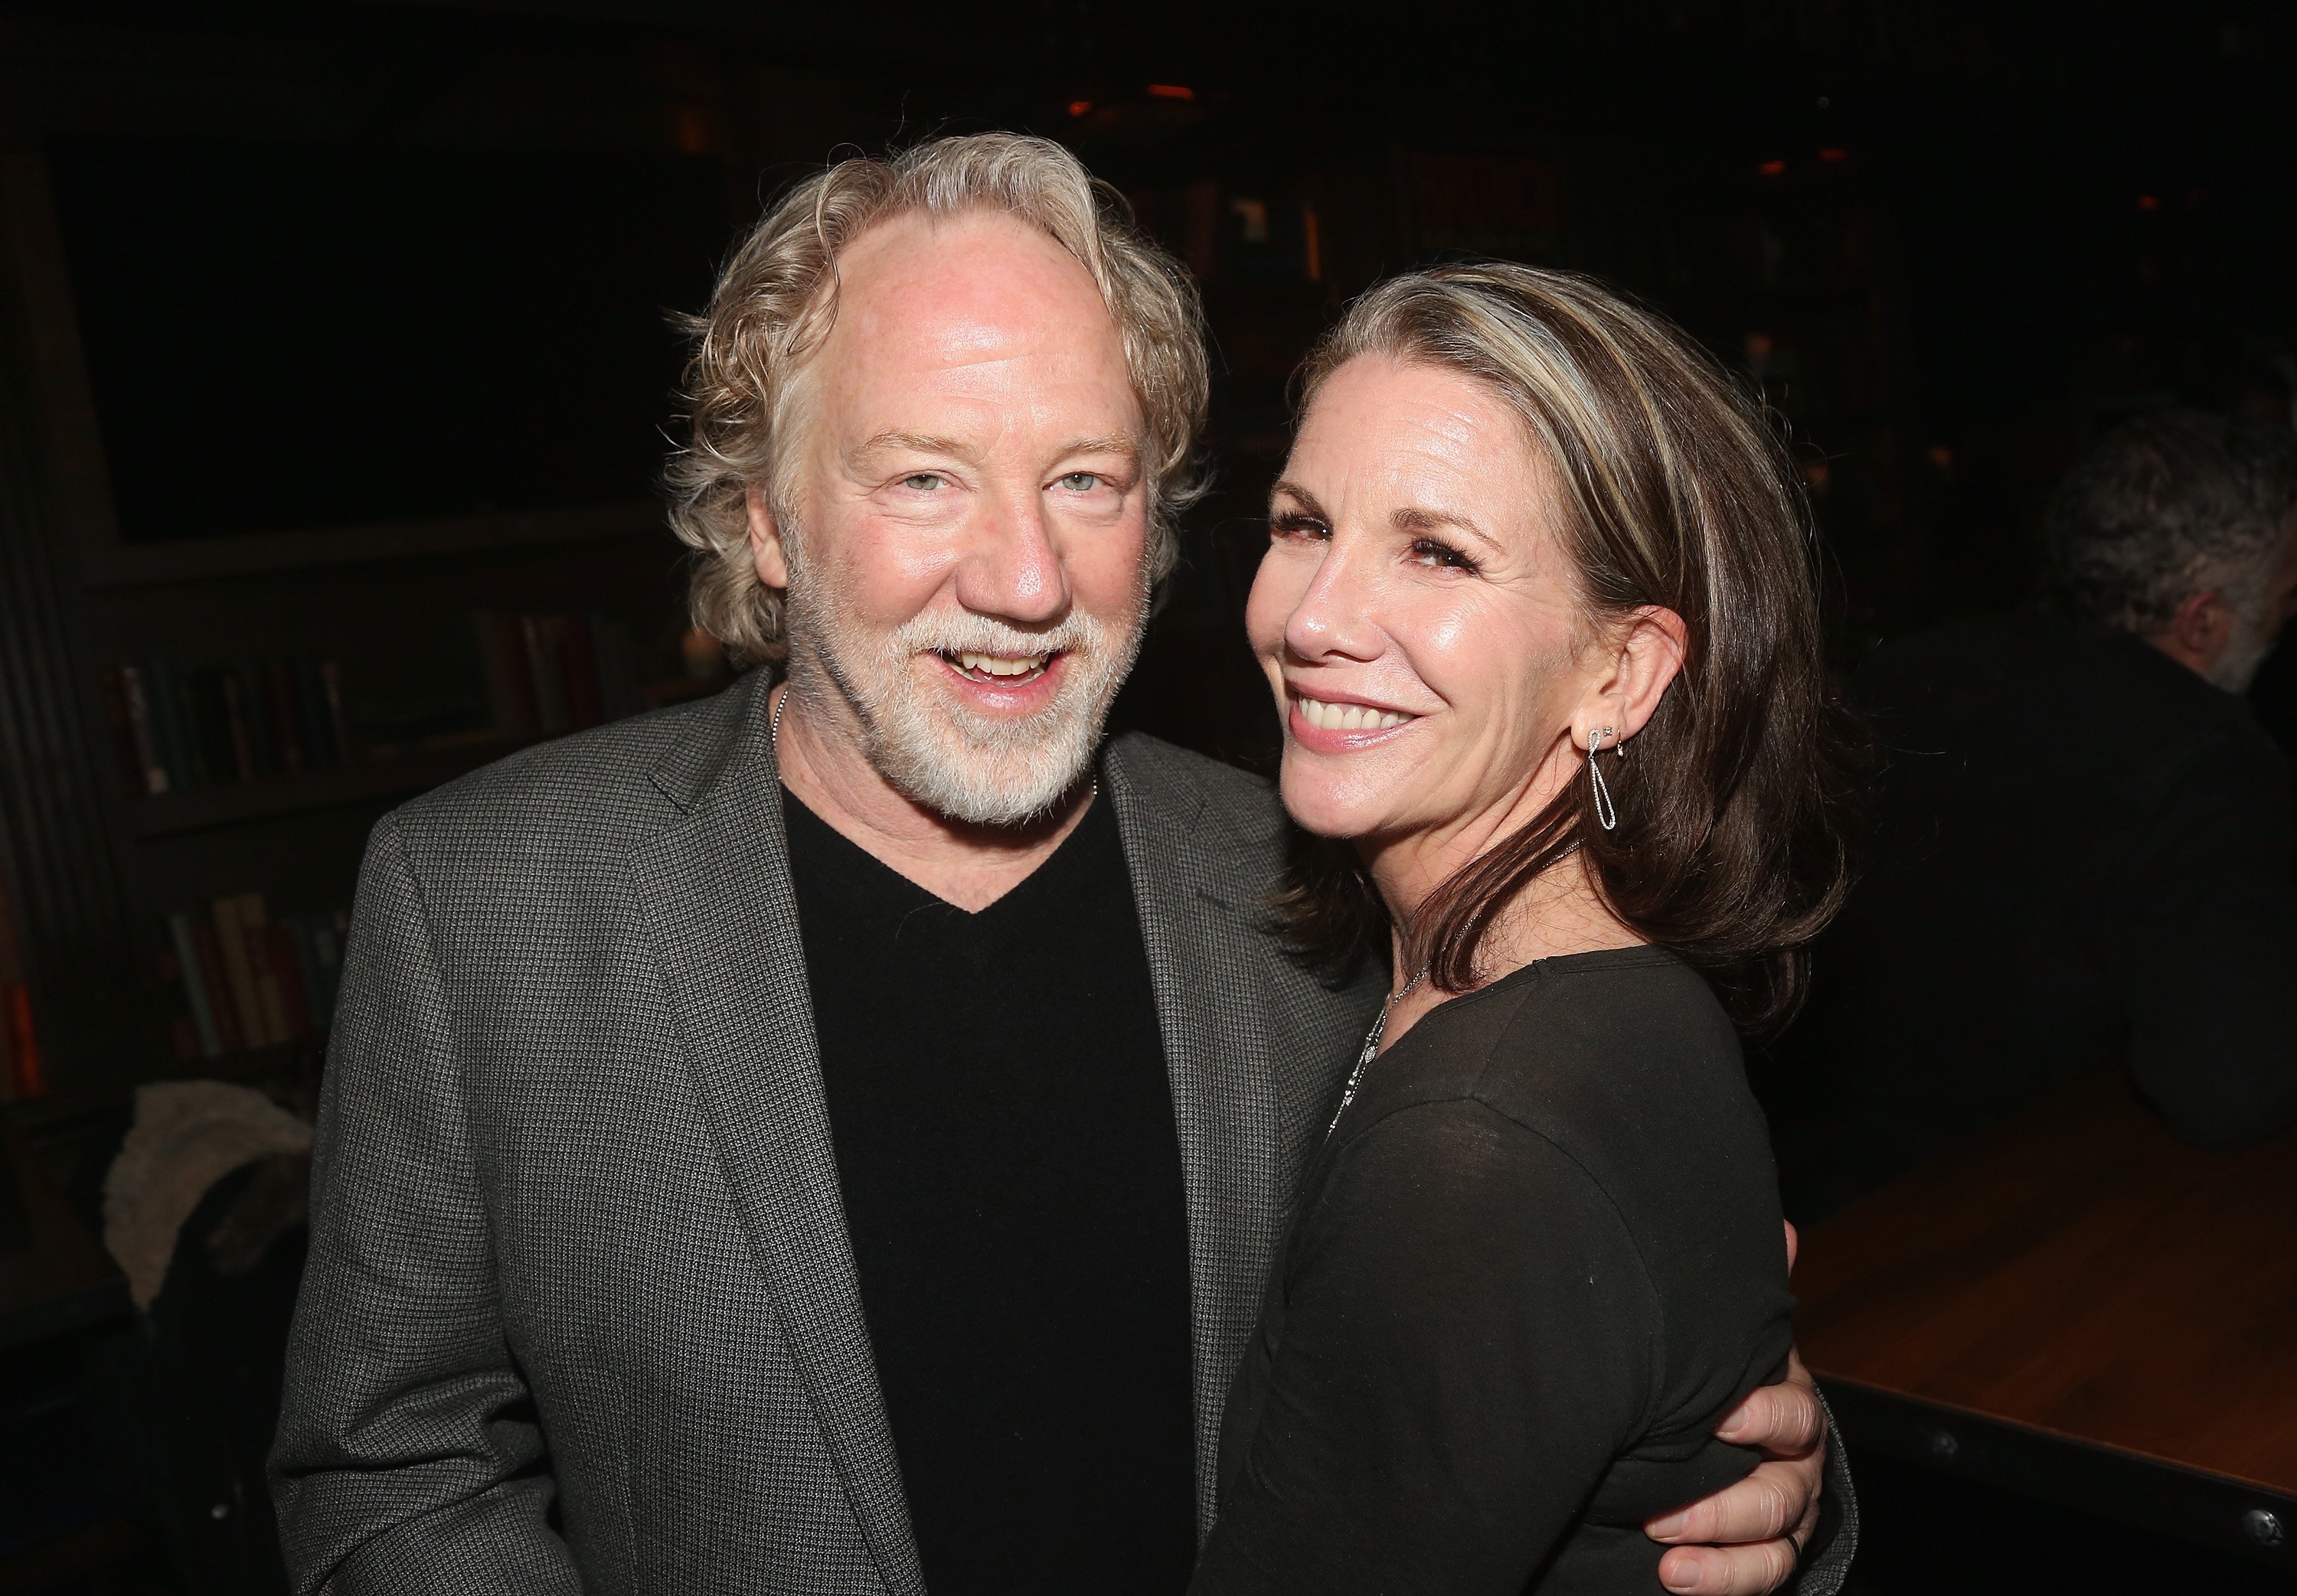  Timothy Busfield and wife Melissa Gilbert pose at the opening night after party for Irish Rep's production of "The Seafarer"at Crompton Ale House on April 18, 2018 in New York City